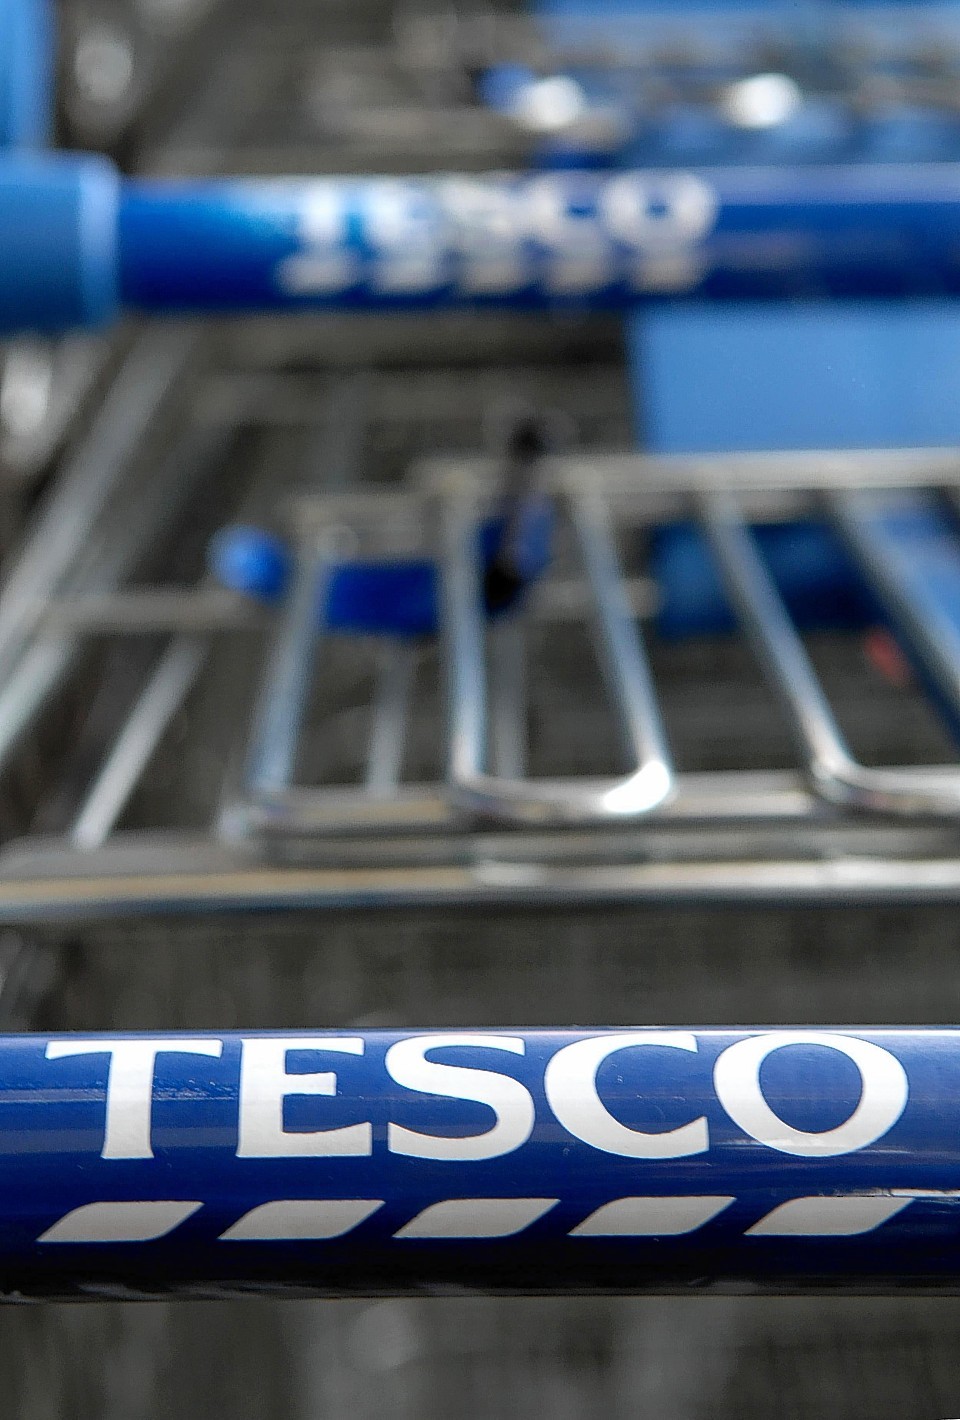 Tesco and other "big four" supermarkets are losing ground to Lidl and Aldi